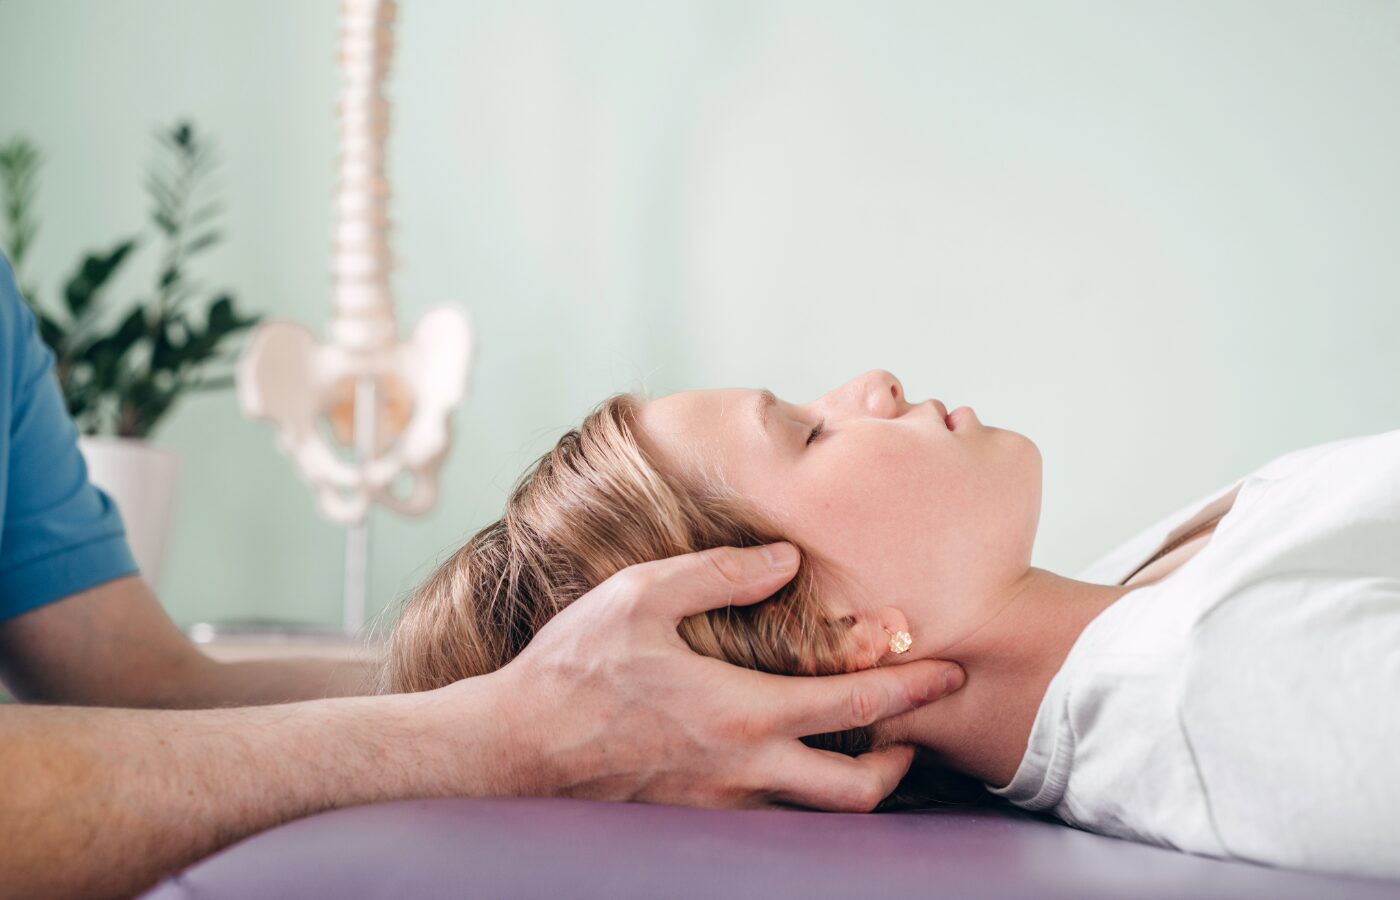 Therapist uses CraioSacral Therapy on a patient lying on the table with a model of the spine behind them.